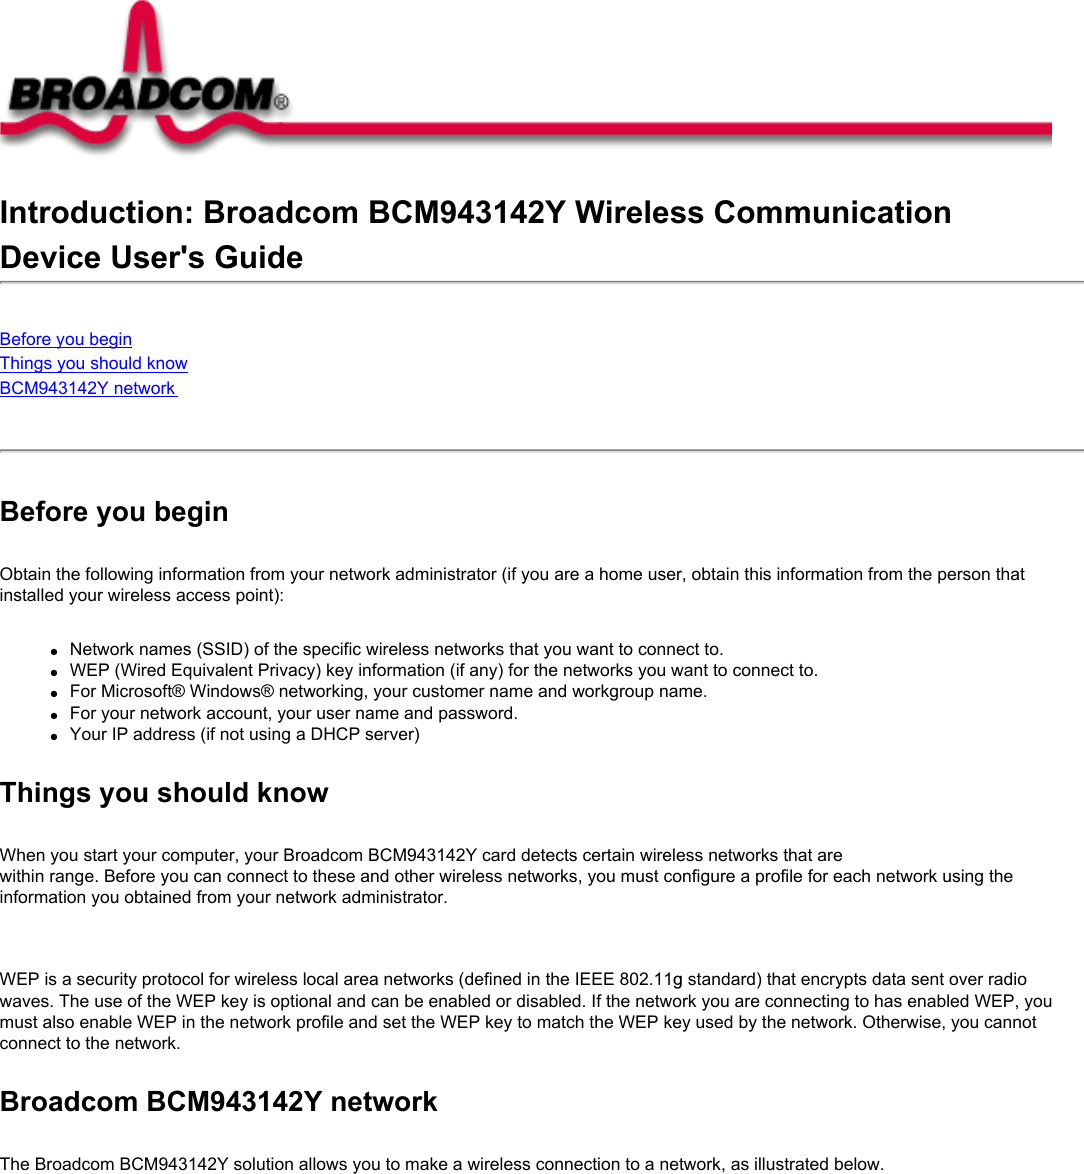 Introduction: Broadcom BCM943142Y Wireless CommunicationDevice User&apos;s GuideBefore you beginThings you should knowBCM943142Y network Before you beginObtain the following information from your network administrator (if you are a home user, obtain this information from the person that installed your wireless access point):●     Network names (SSID) of the specific wireless networks that you want to connect to.●     WEP (Wired Equivalent Privacy) key information (if any) for the networks you want to connect to.●     For Microsoft® Windows® networking, your customer name and workgroup name.●     For your network account, your user name and password.●     Your IP address (if not using a DHCP server)Things you should knowWhen you start your computer, your Broadcom BCM943142Y card detects certain wireless networks that are within range. Before you can connect to these and other wireless networks, you must configure a profile for each network using the information you obtained from your network administrator.   WEP is a security protocol for wireless local area networks (defined in the IEEE 802.11g standard) that encrypts data sent over radio waves. The use of the WEP key is optional and can be enabled or disabled. If the network you are connecting to has enabled WEP, you must also enable WEP in the network profile and set the WEP key to match the WEP key used by the network. Otherwise, you cannot connect to the network.Broadcom BCM943142Y networkThe Broadcom BCM943142Y solution allows you to make a wireless connection to a network, as illustrated below.